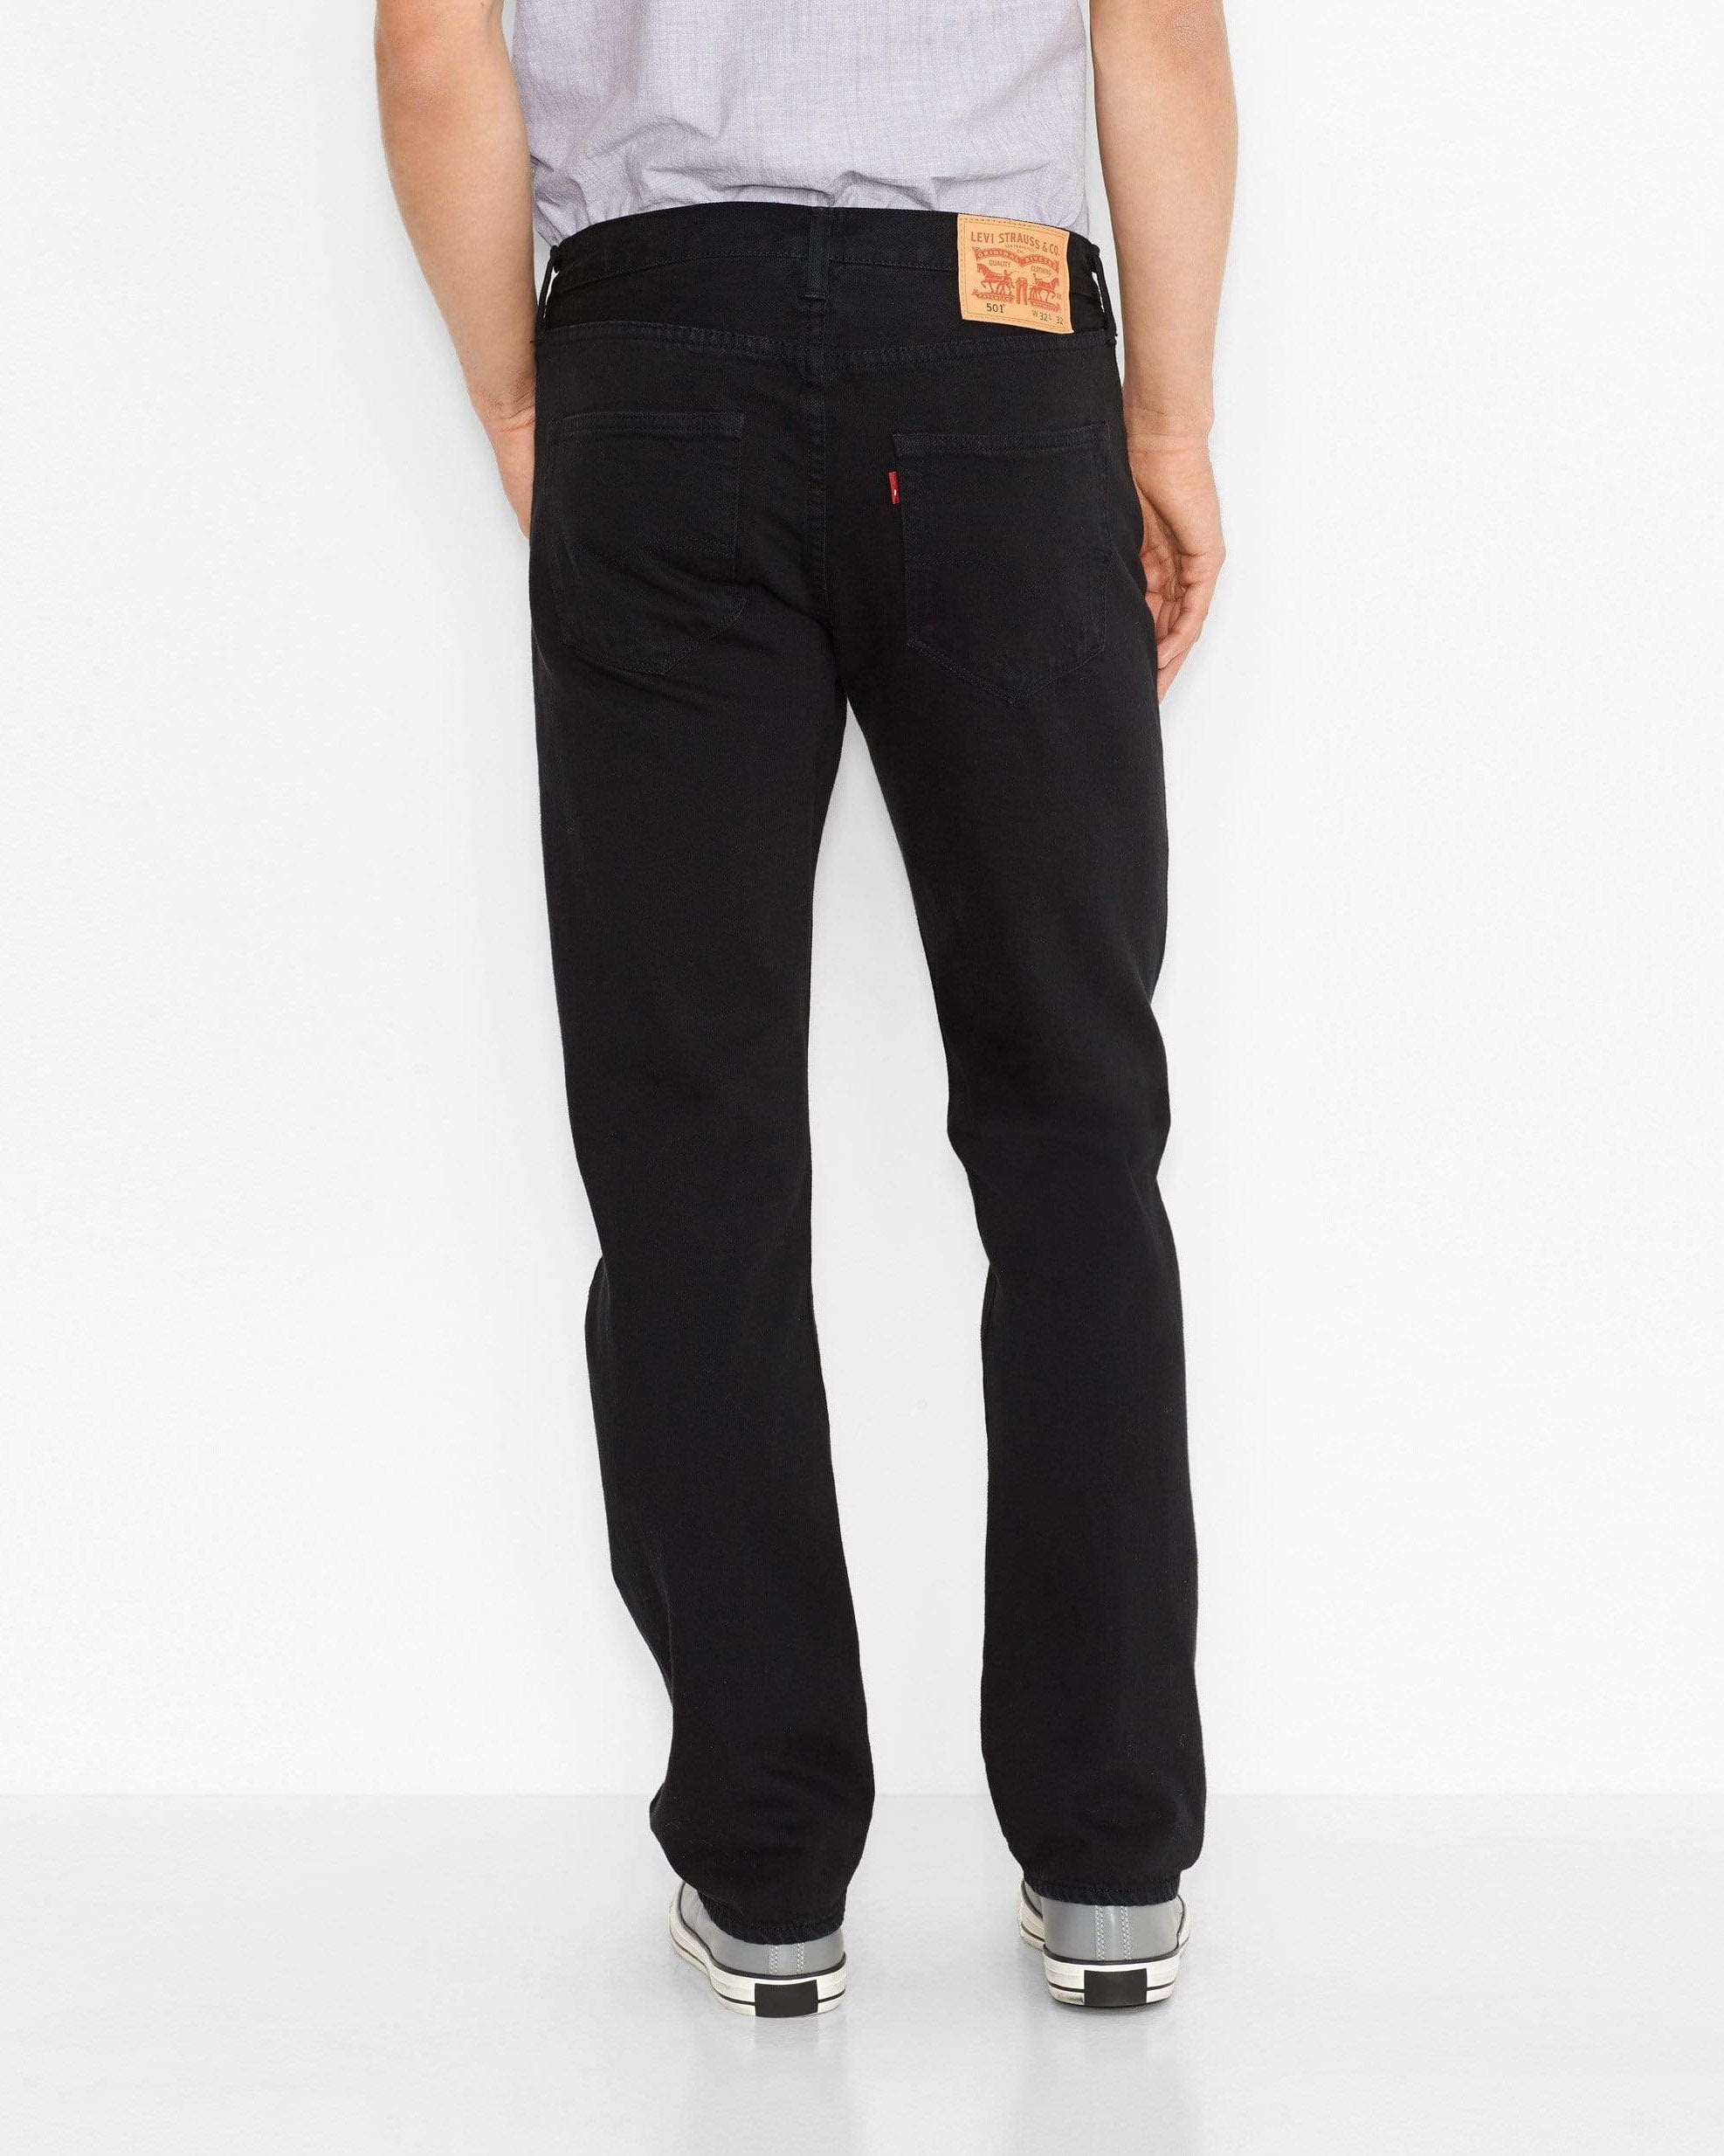 Levis 501 Original Regular Fit Mens Jeans Black - Jeans and Street Fashion from Jeanstore